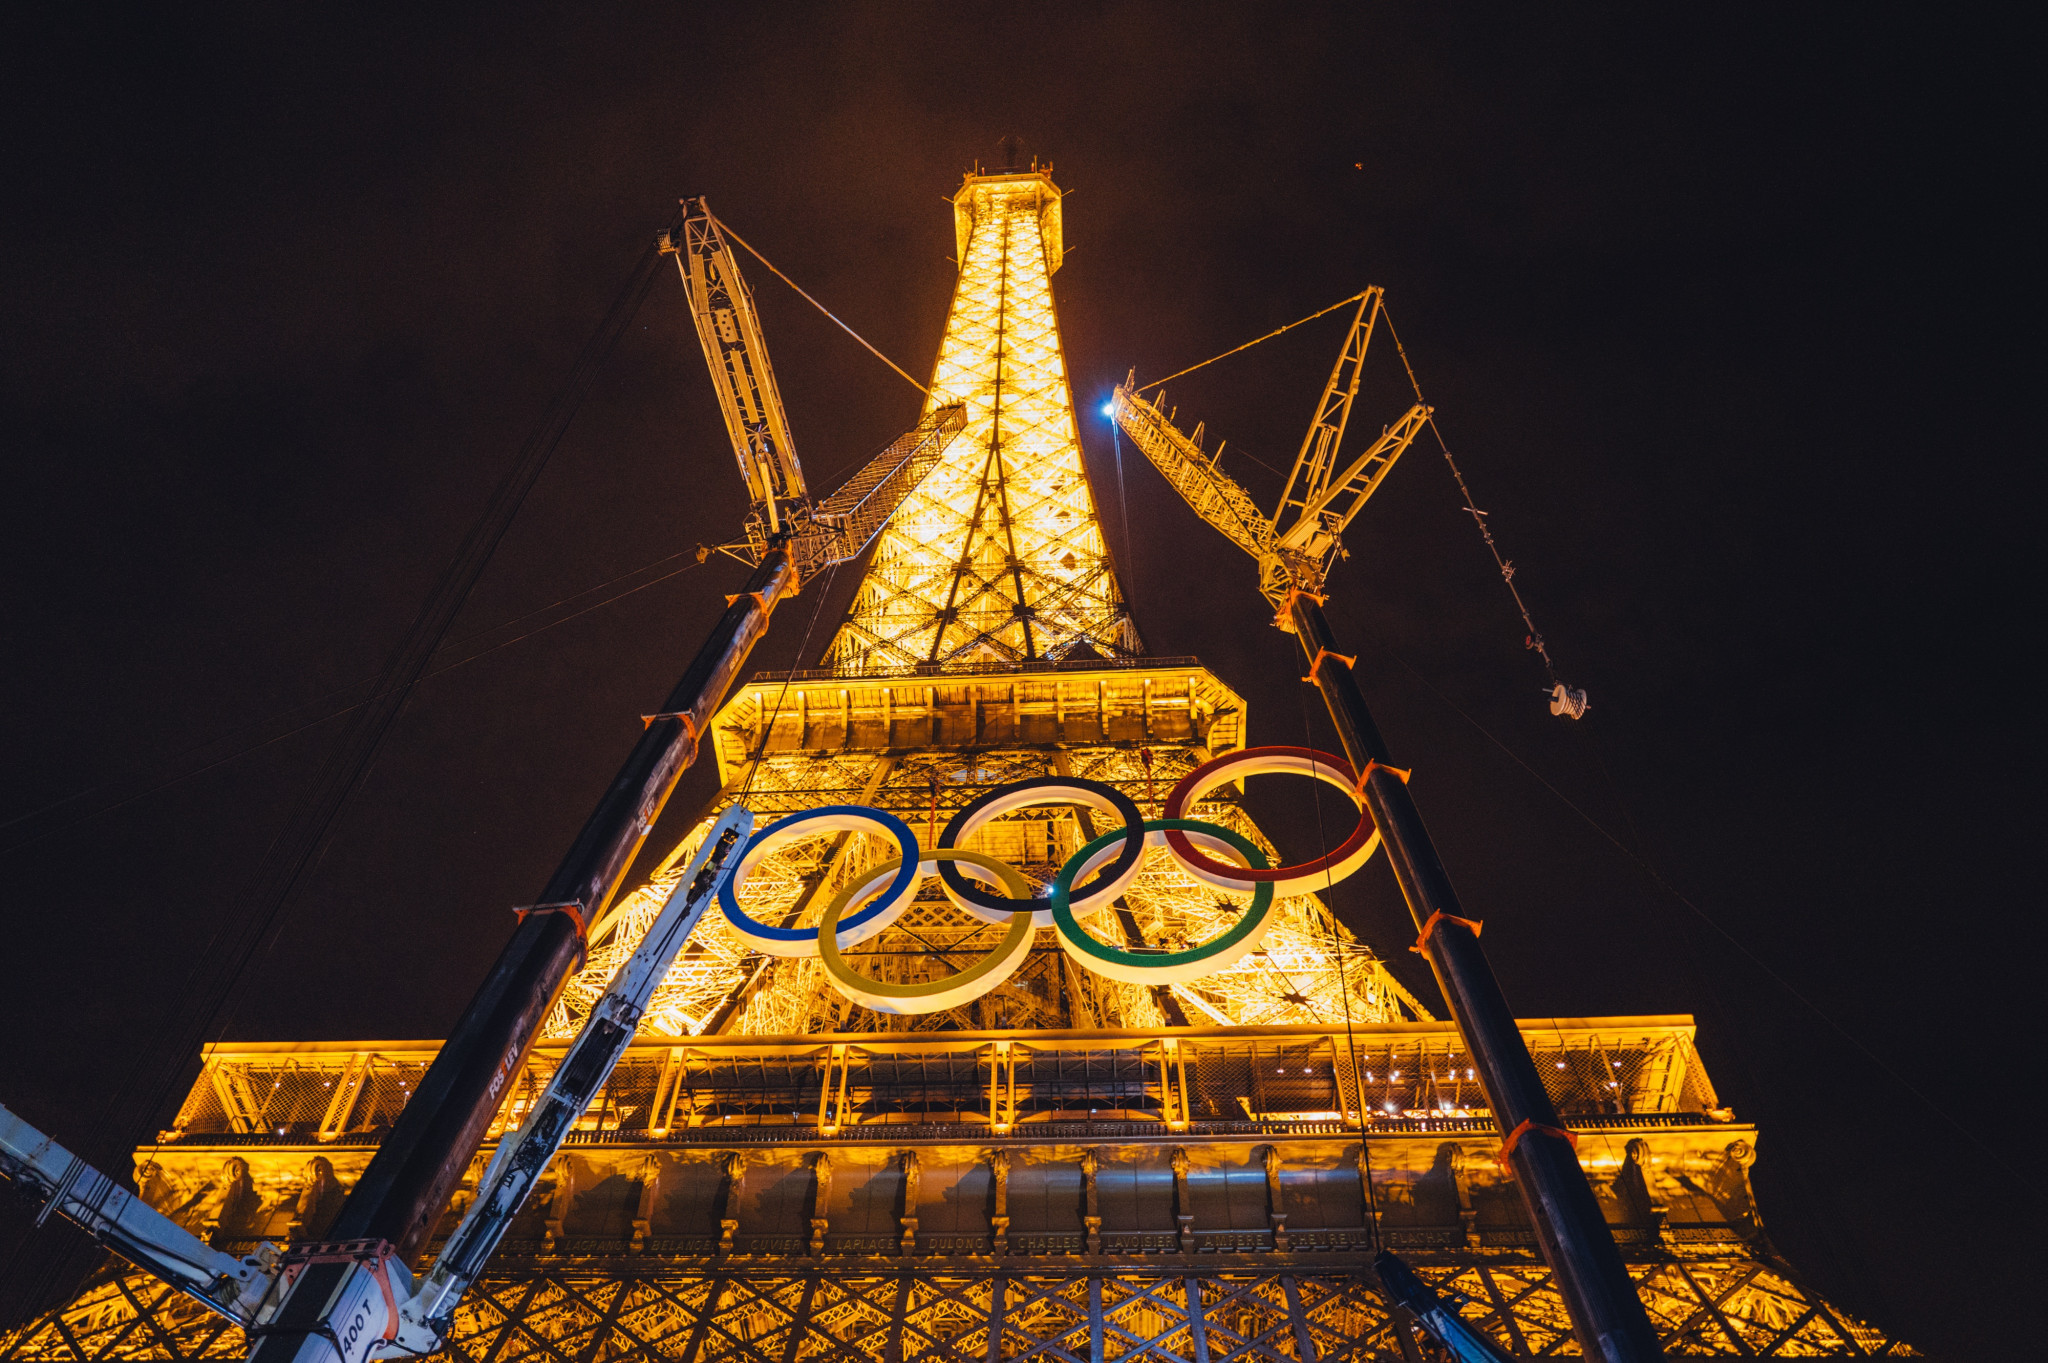 The Olympic rings were raised onto the Eiffel Tower overnight marking 50 days before the start of the Games. OLYMPICS.COM